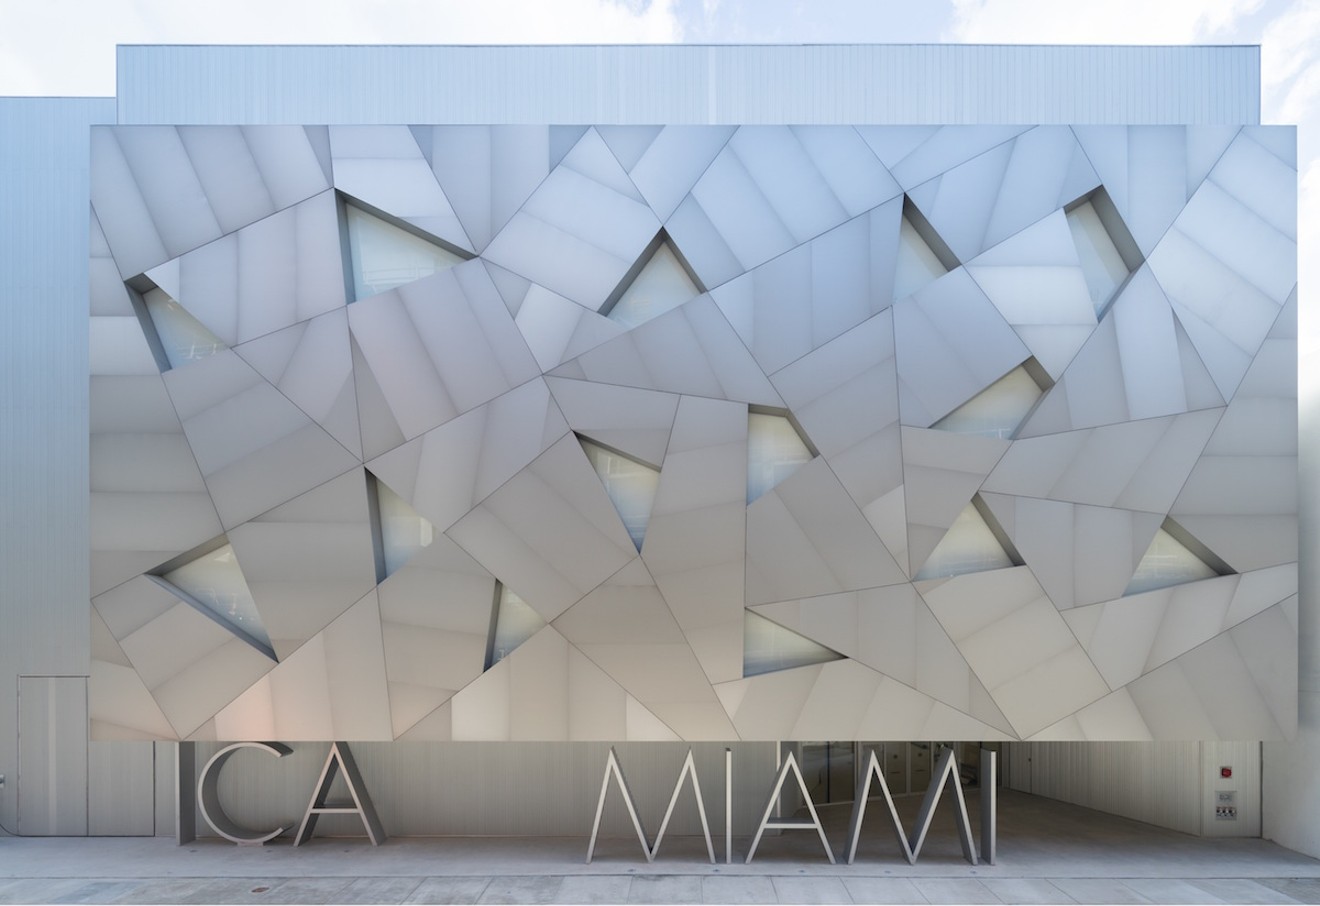 The façade of ICA Miami's permanent home in the Design District.